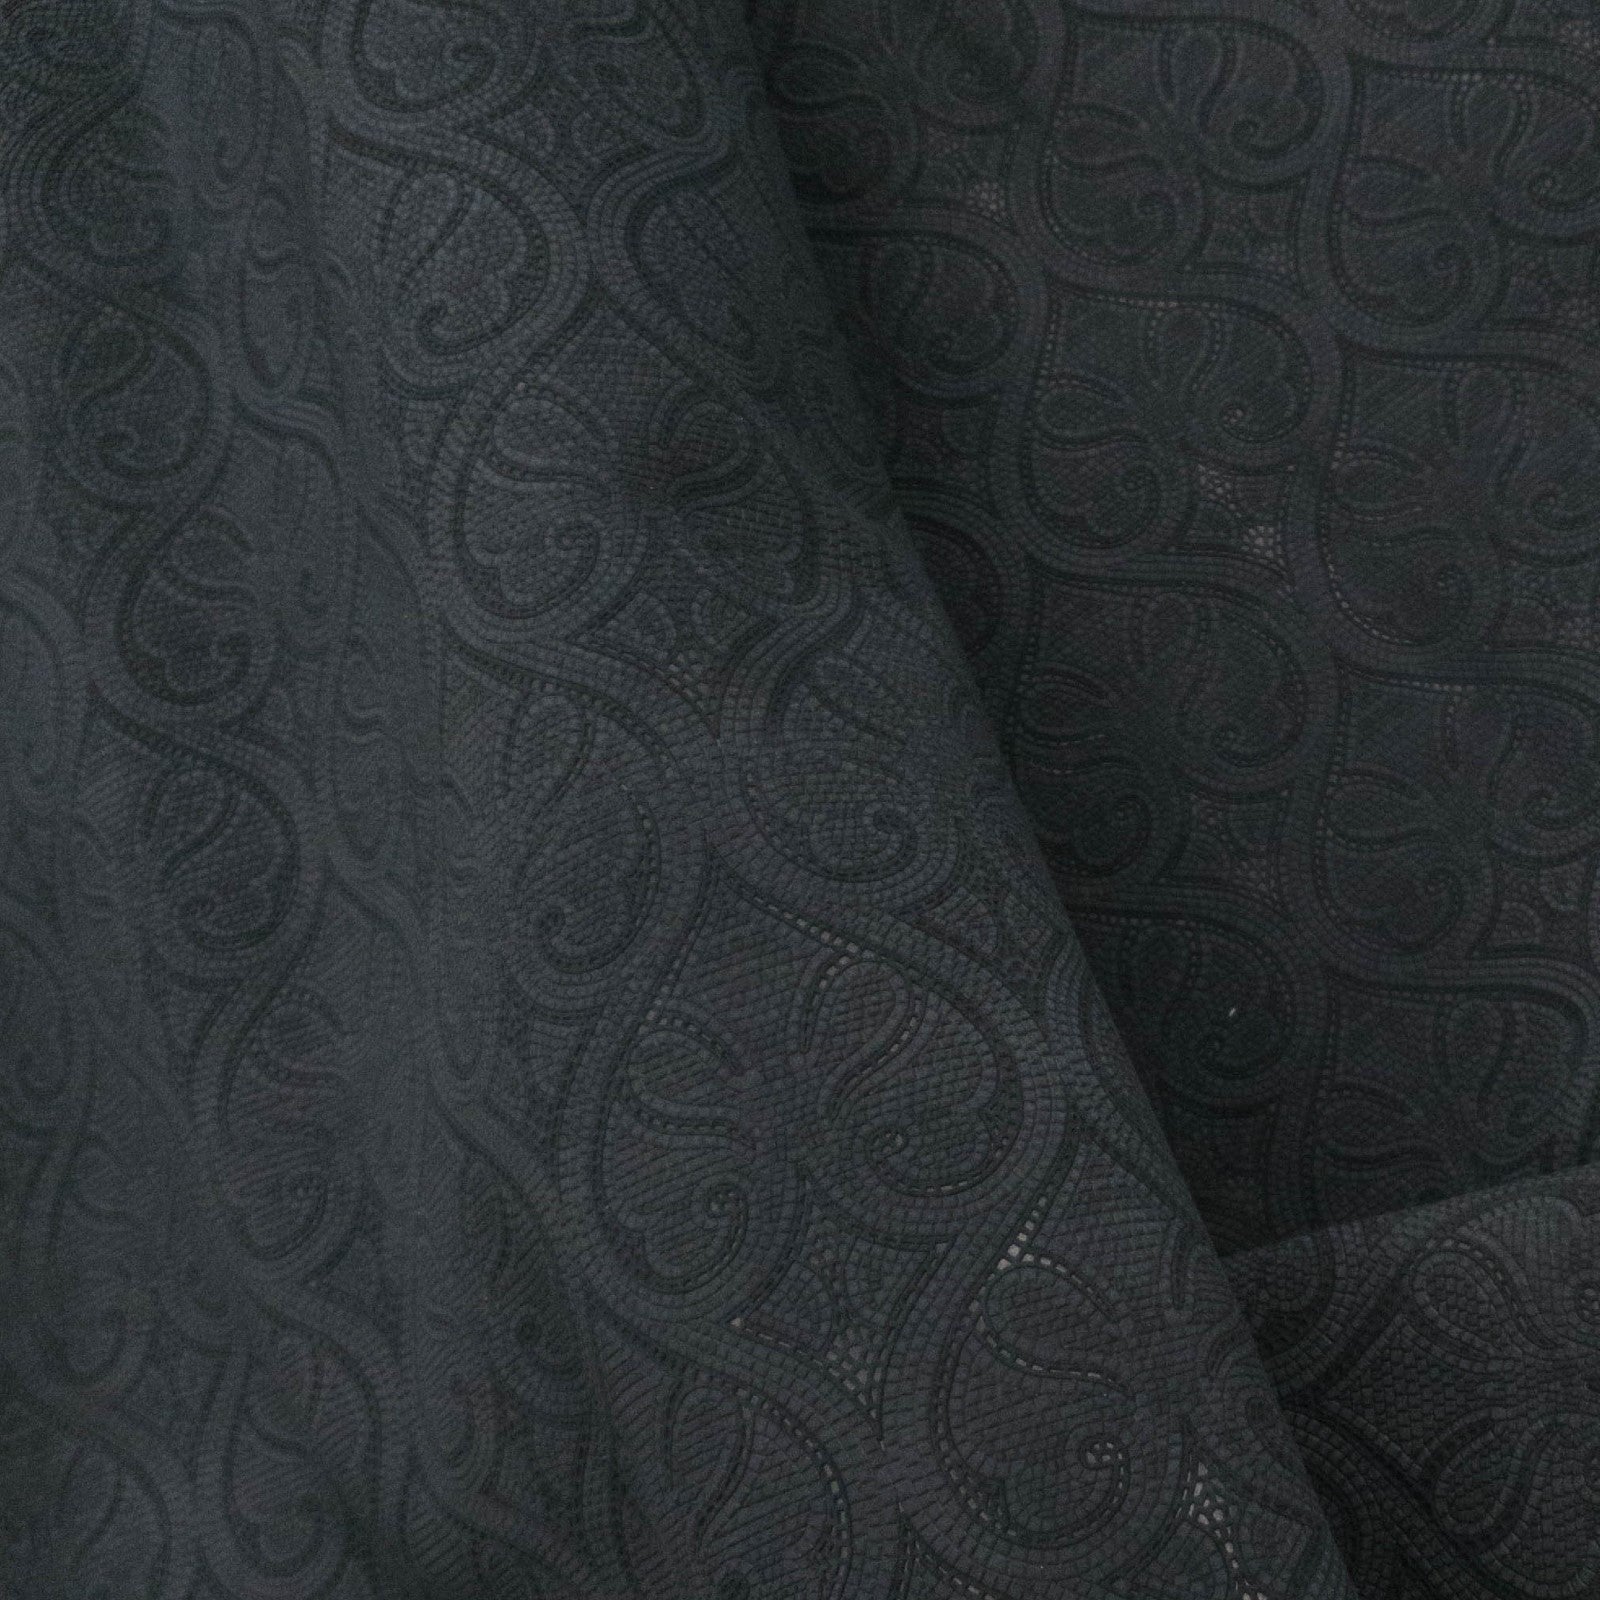 Embossed, 3-4 oz Fashion, Limited Stock Pre-cuts, Black Valentine / 4 x 6 | The Leather Guy